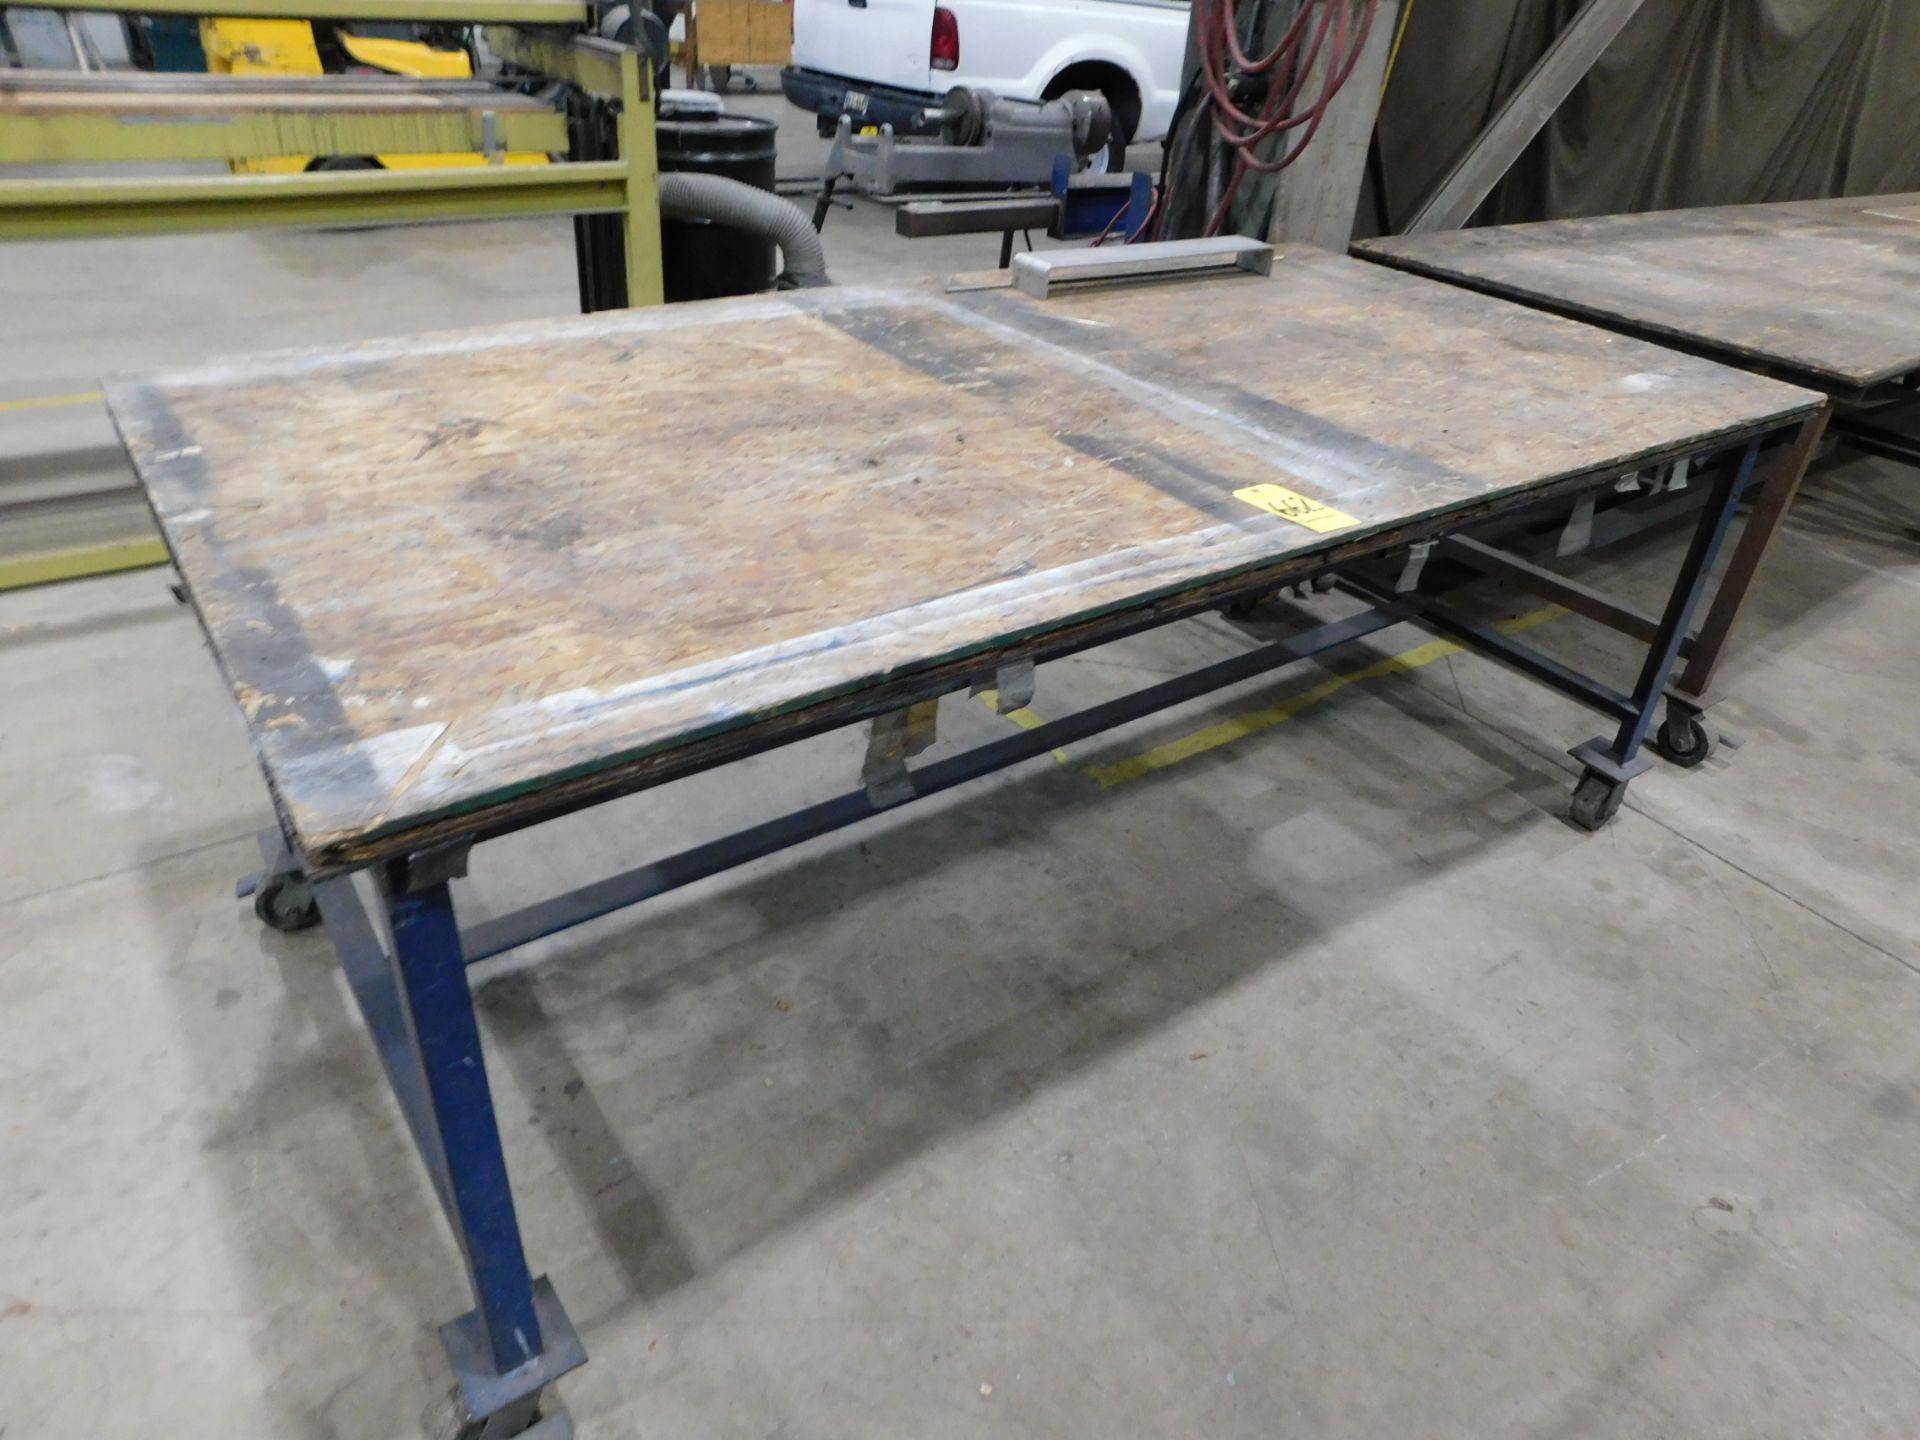 Shop Table on Casters, 4' X 8' X 37" High